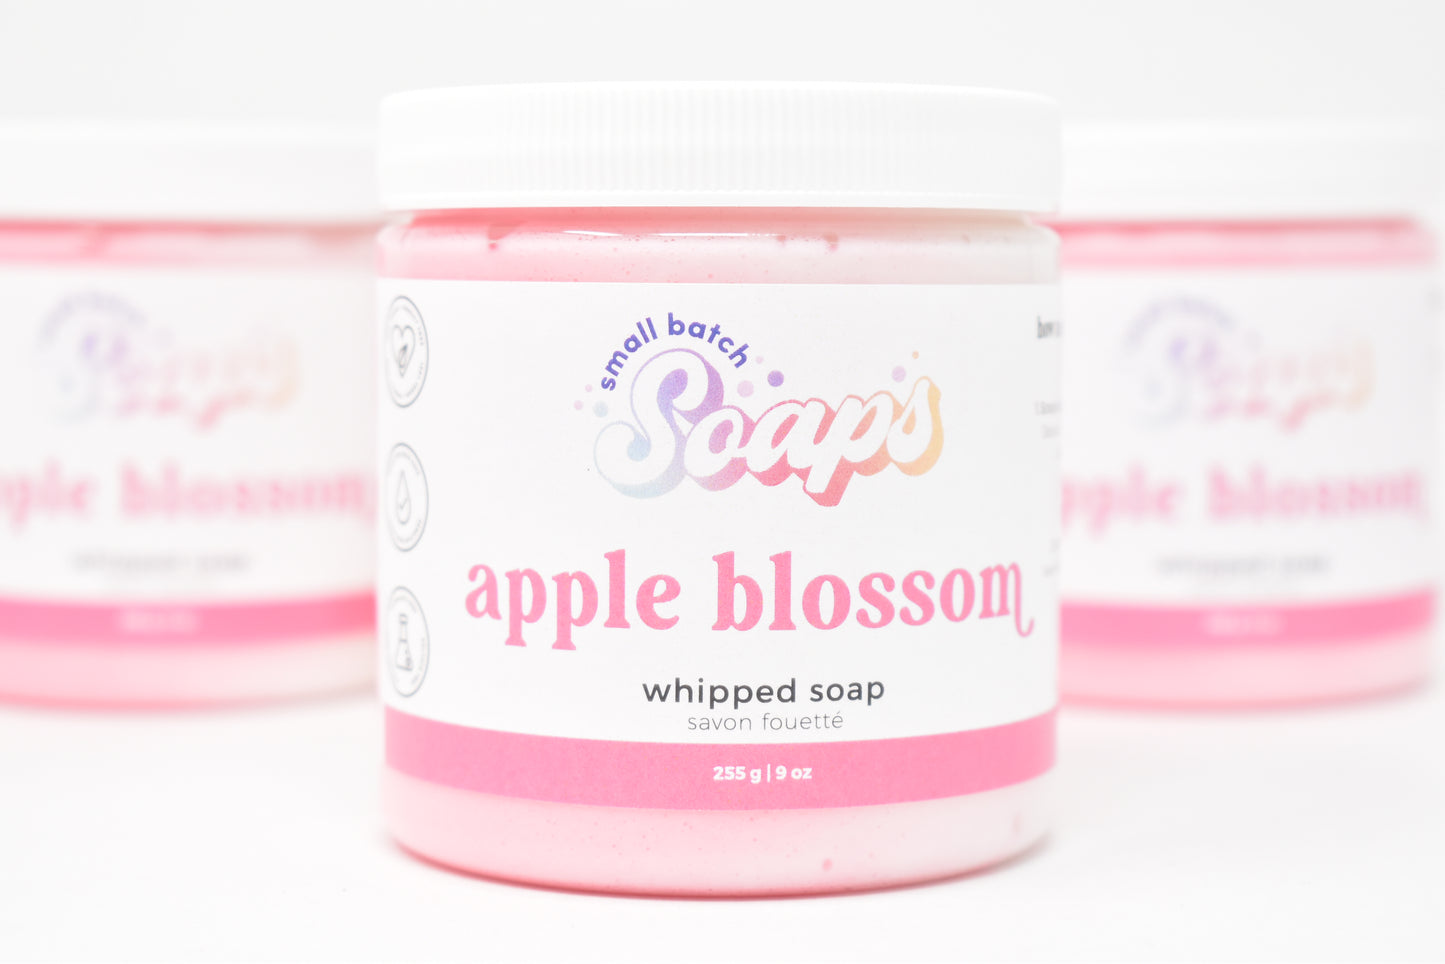 Apple Blossom Whipped Soap - Small Batch Soaps